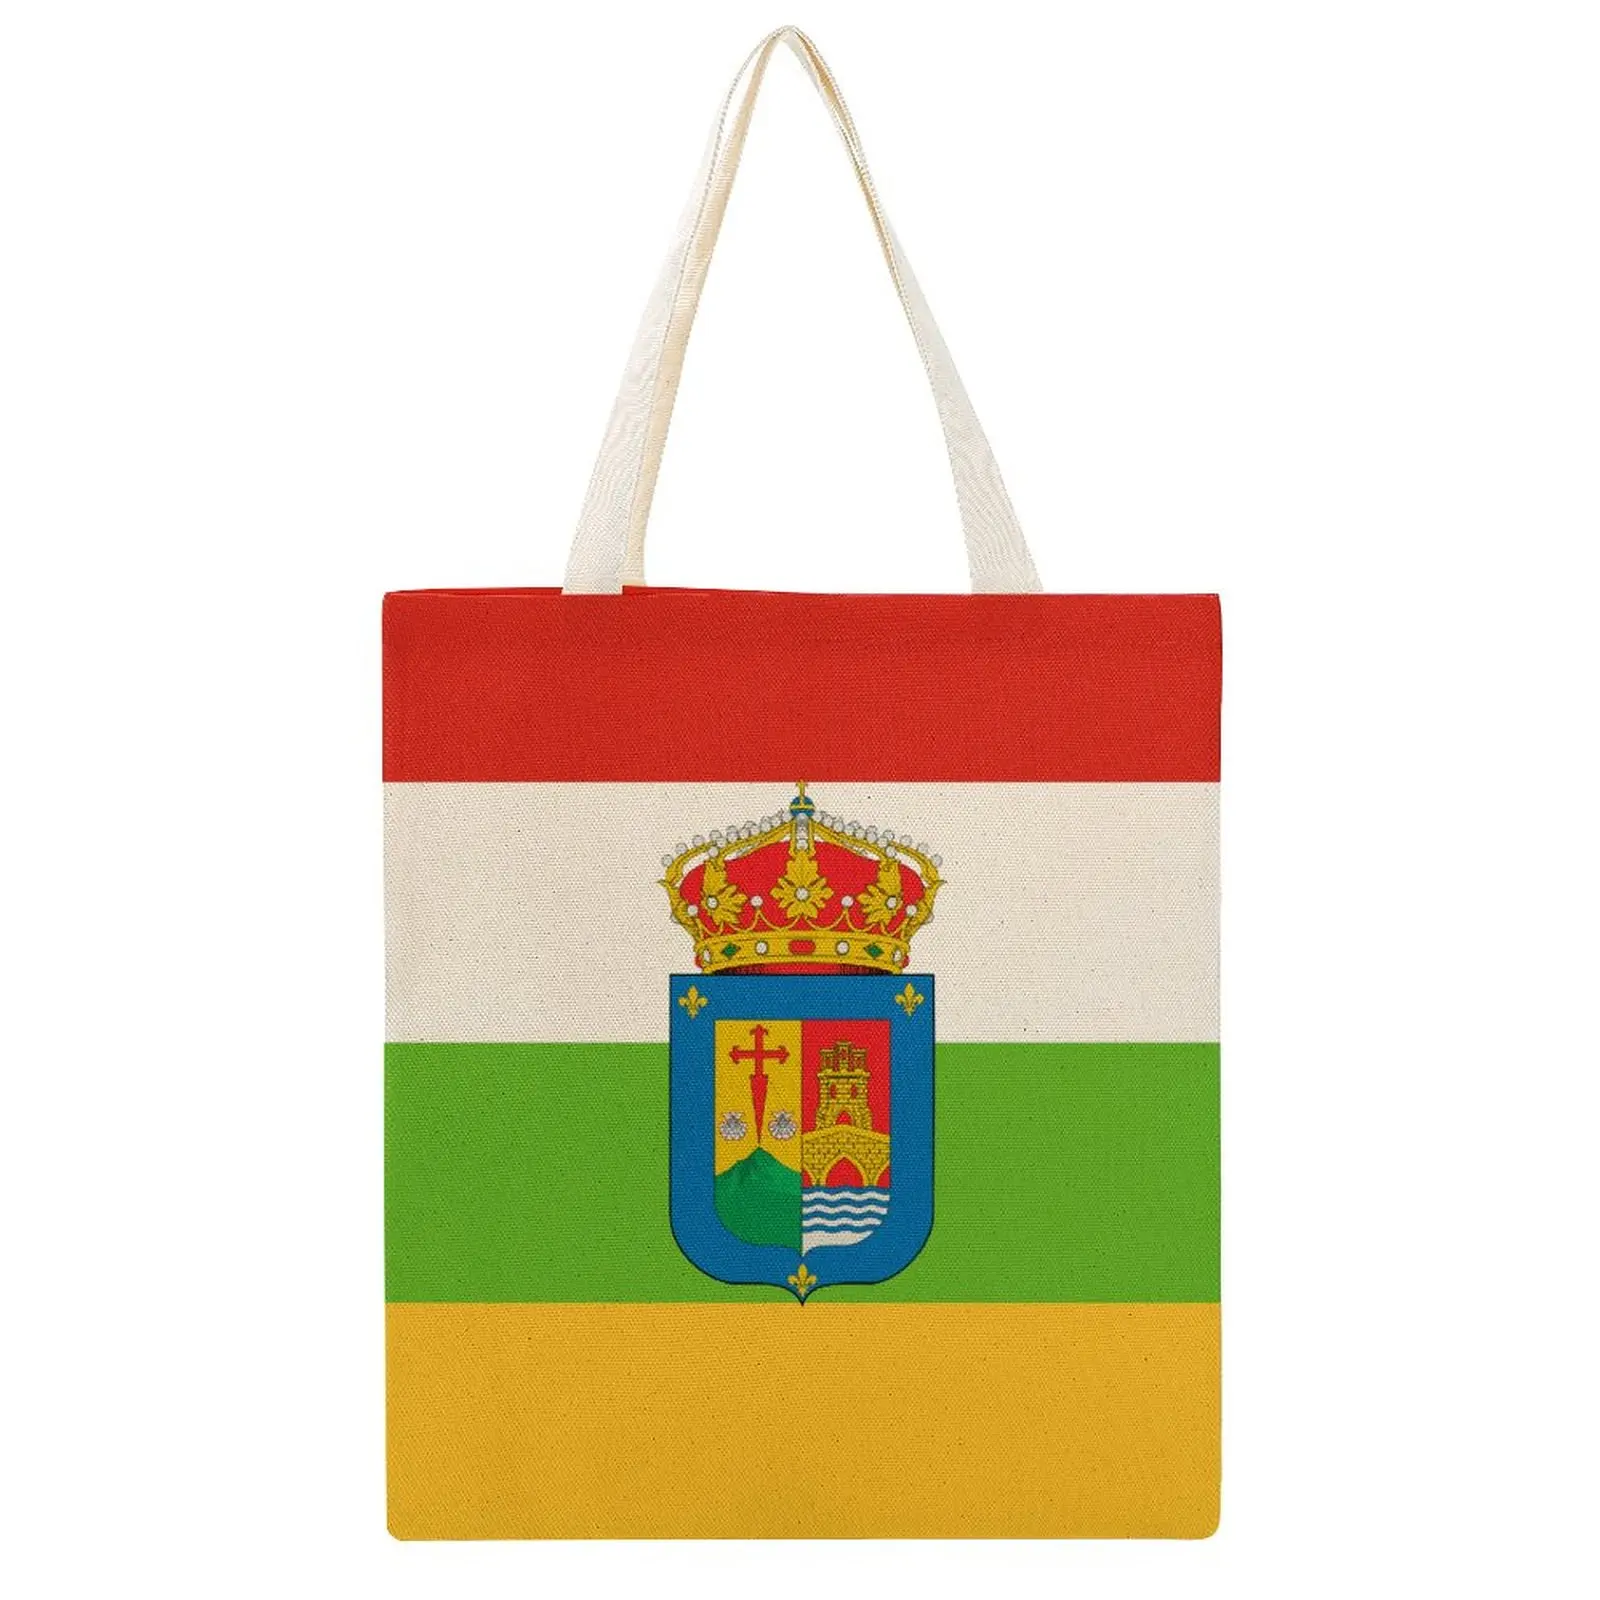 

Canvas Bag Flag of La Rioja (with Coat of Arms) High Quality Bags Hot Sale Funny Novelty Drawstring Backpack Canvas Tote Bag Dou